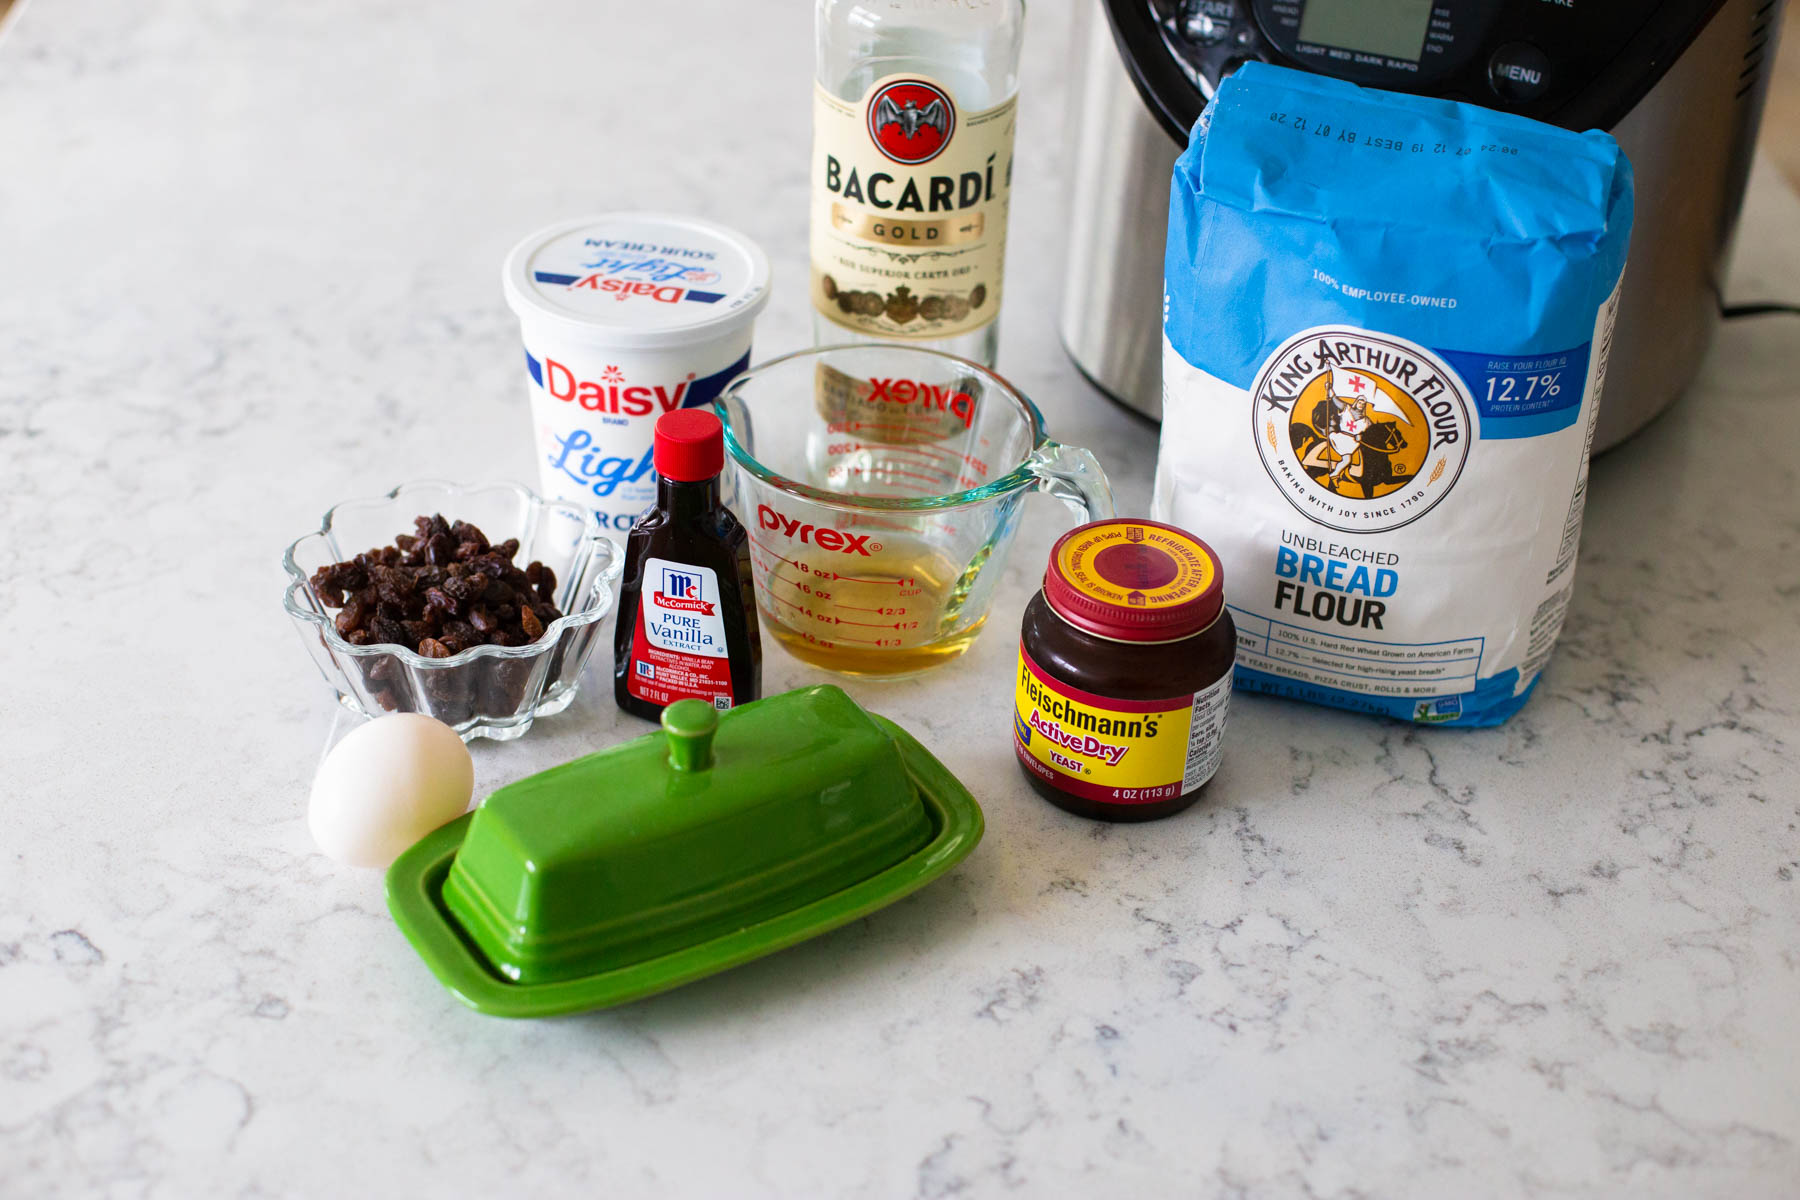 The ingredients to make the raisin bread in a bread maker are on the counter.